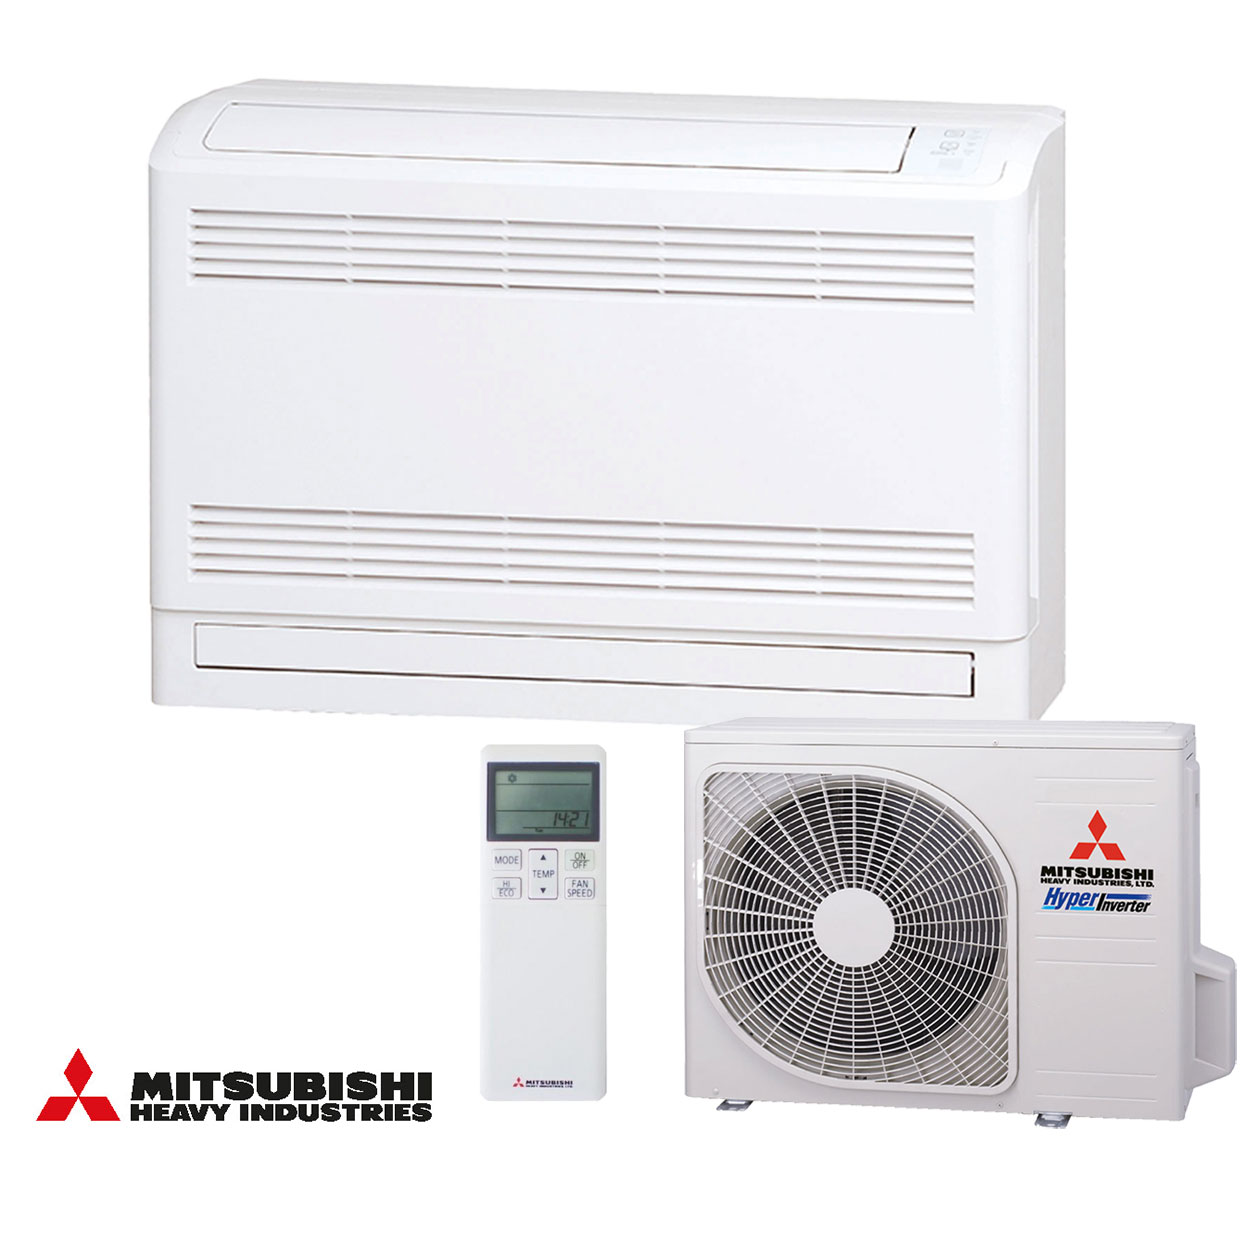 Complete set vloermodel airconditioning Airconditioning